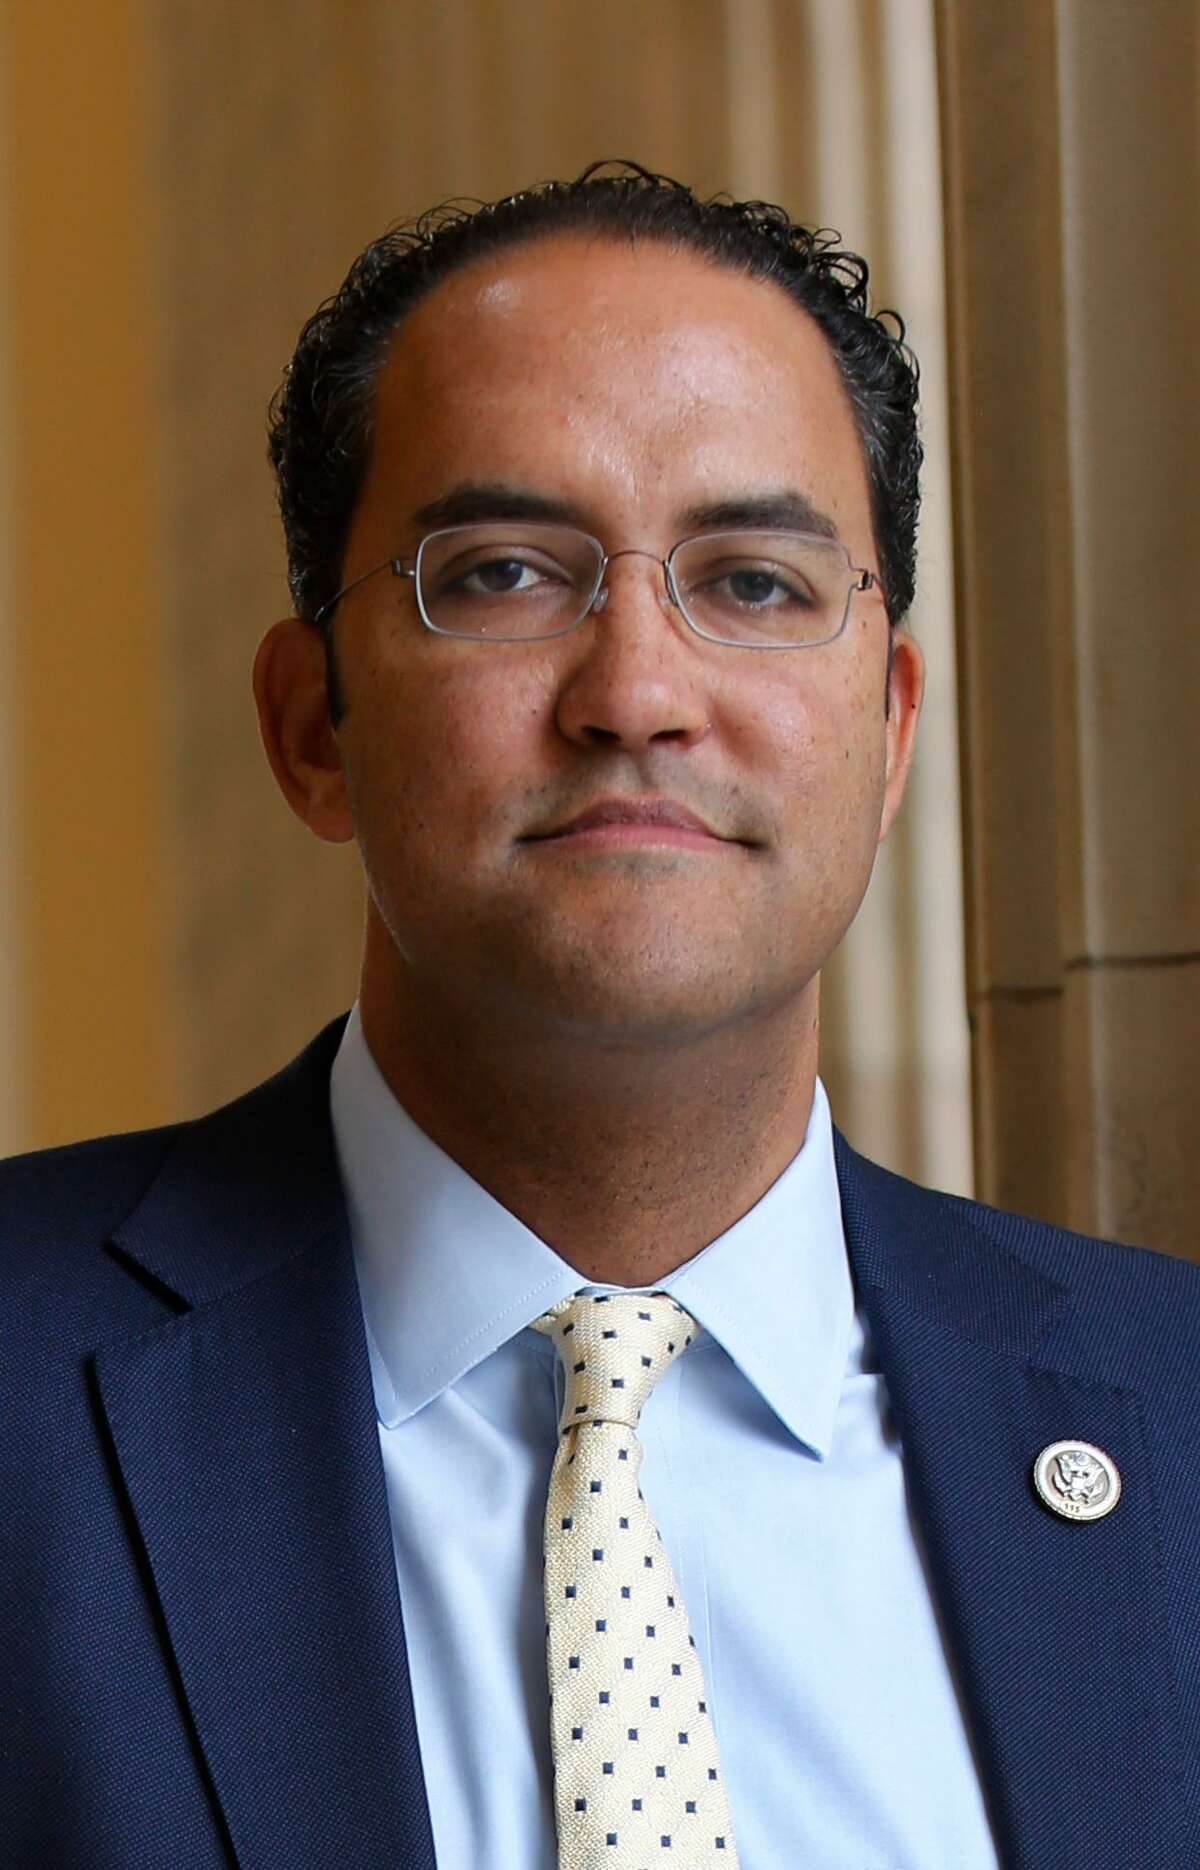 WASHINGTON, DC - January 19, 2017 - Rep. Will Hurd, R-TX, in the rotunda of the Cannon Building where his office is.